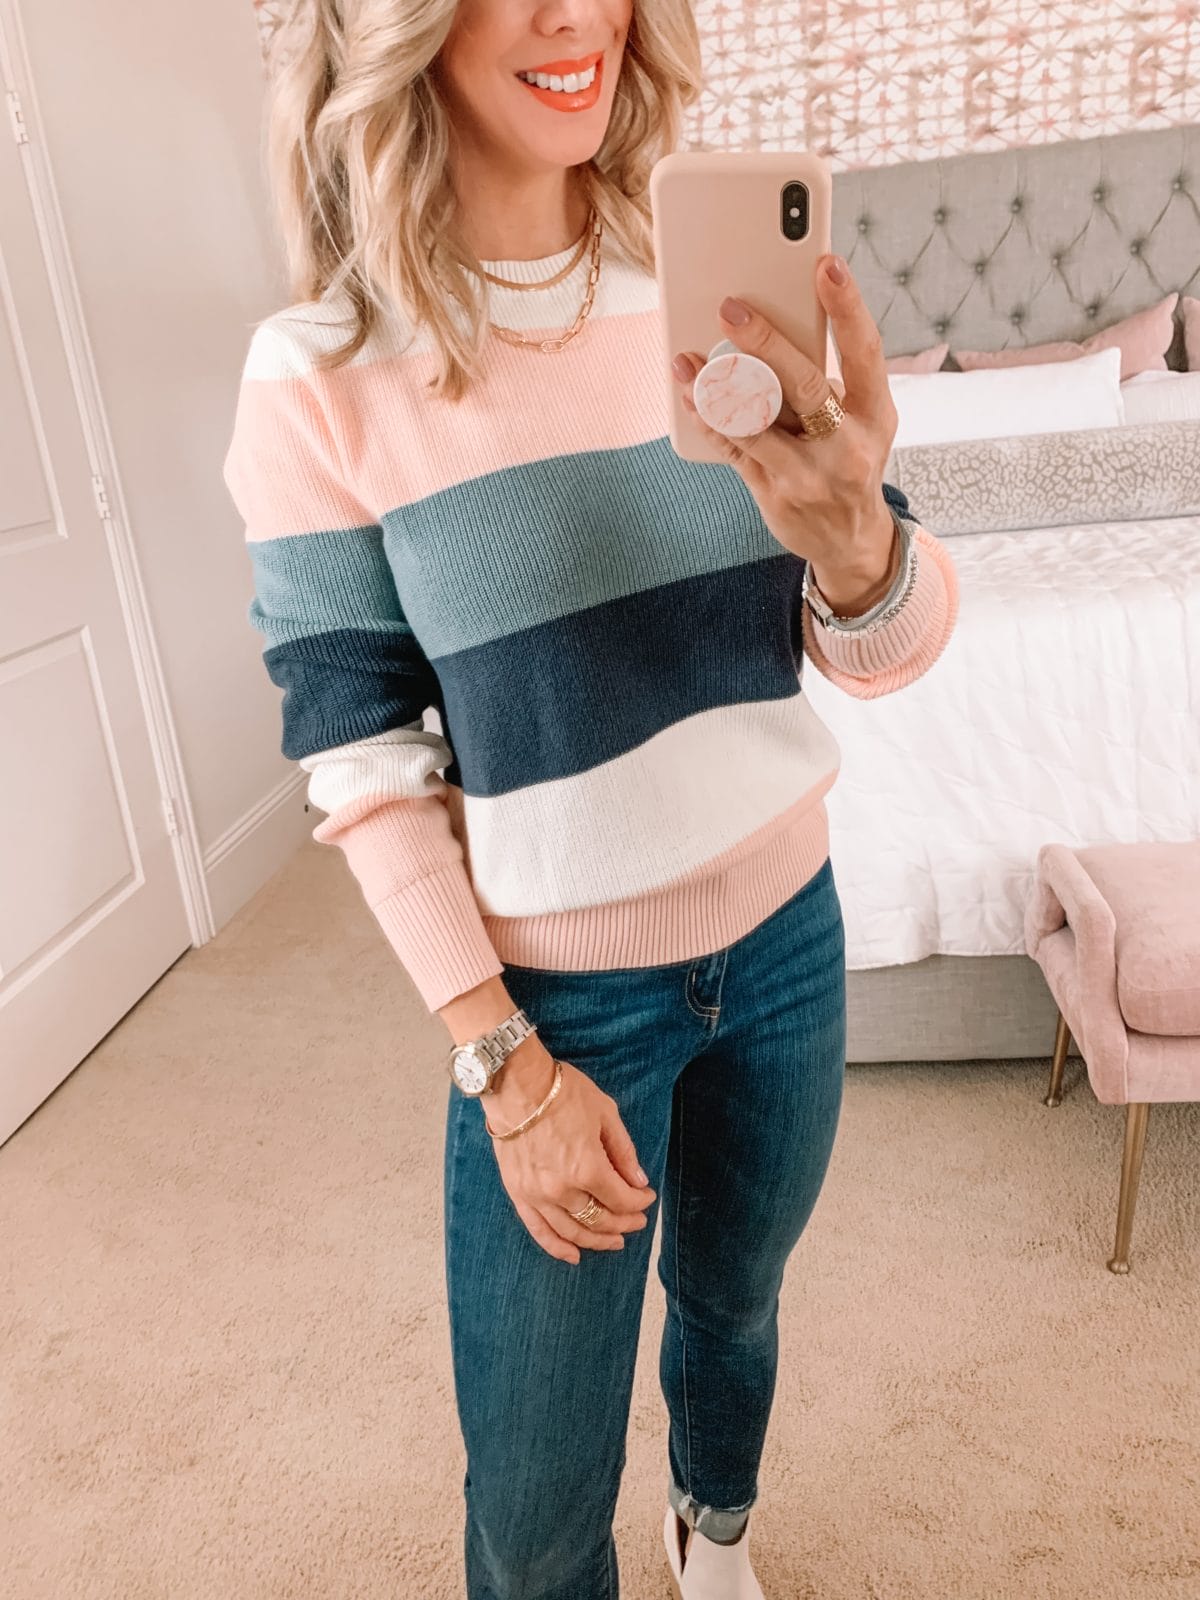 Amazon Fashion Faves, Colorblock Sweater, Jeans, White Booties 